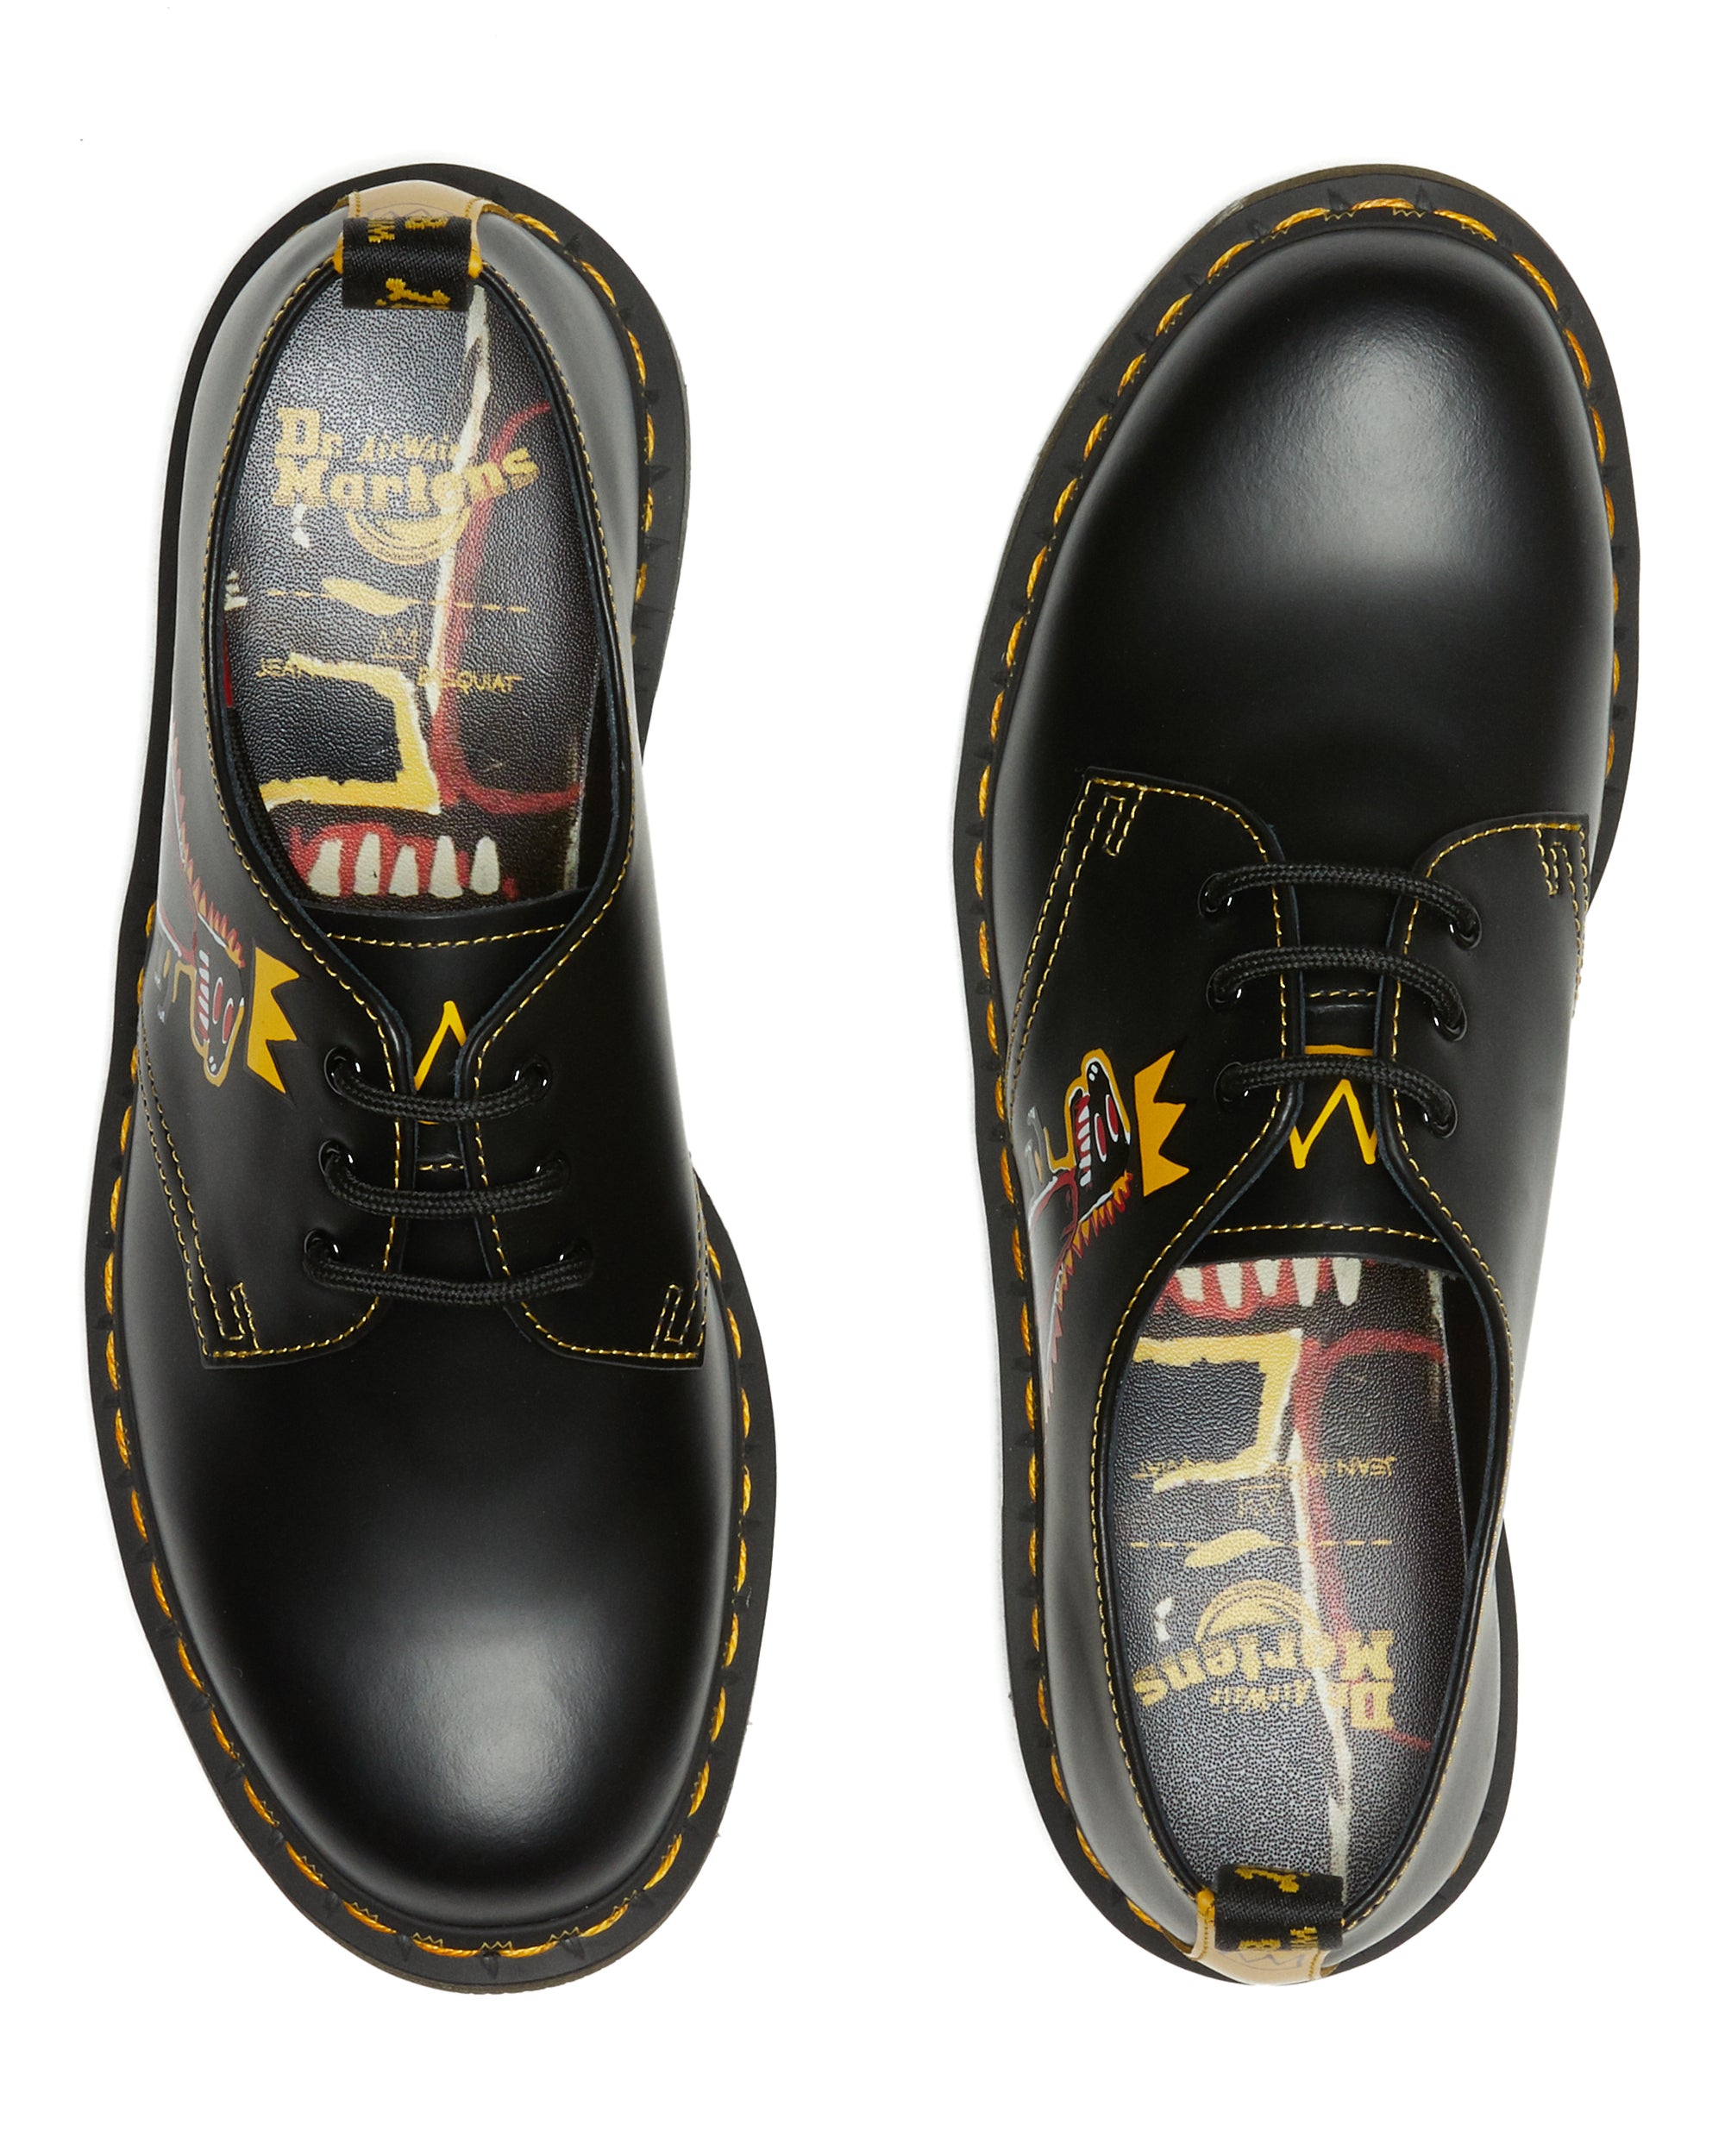 1461 Basquiat II Black+DMS Yellow Pez Smooth Leather Oxford Shoes